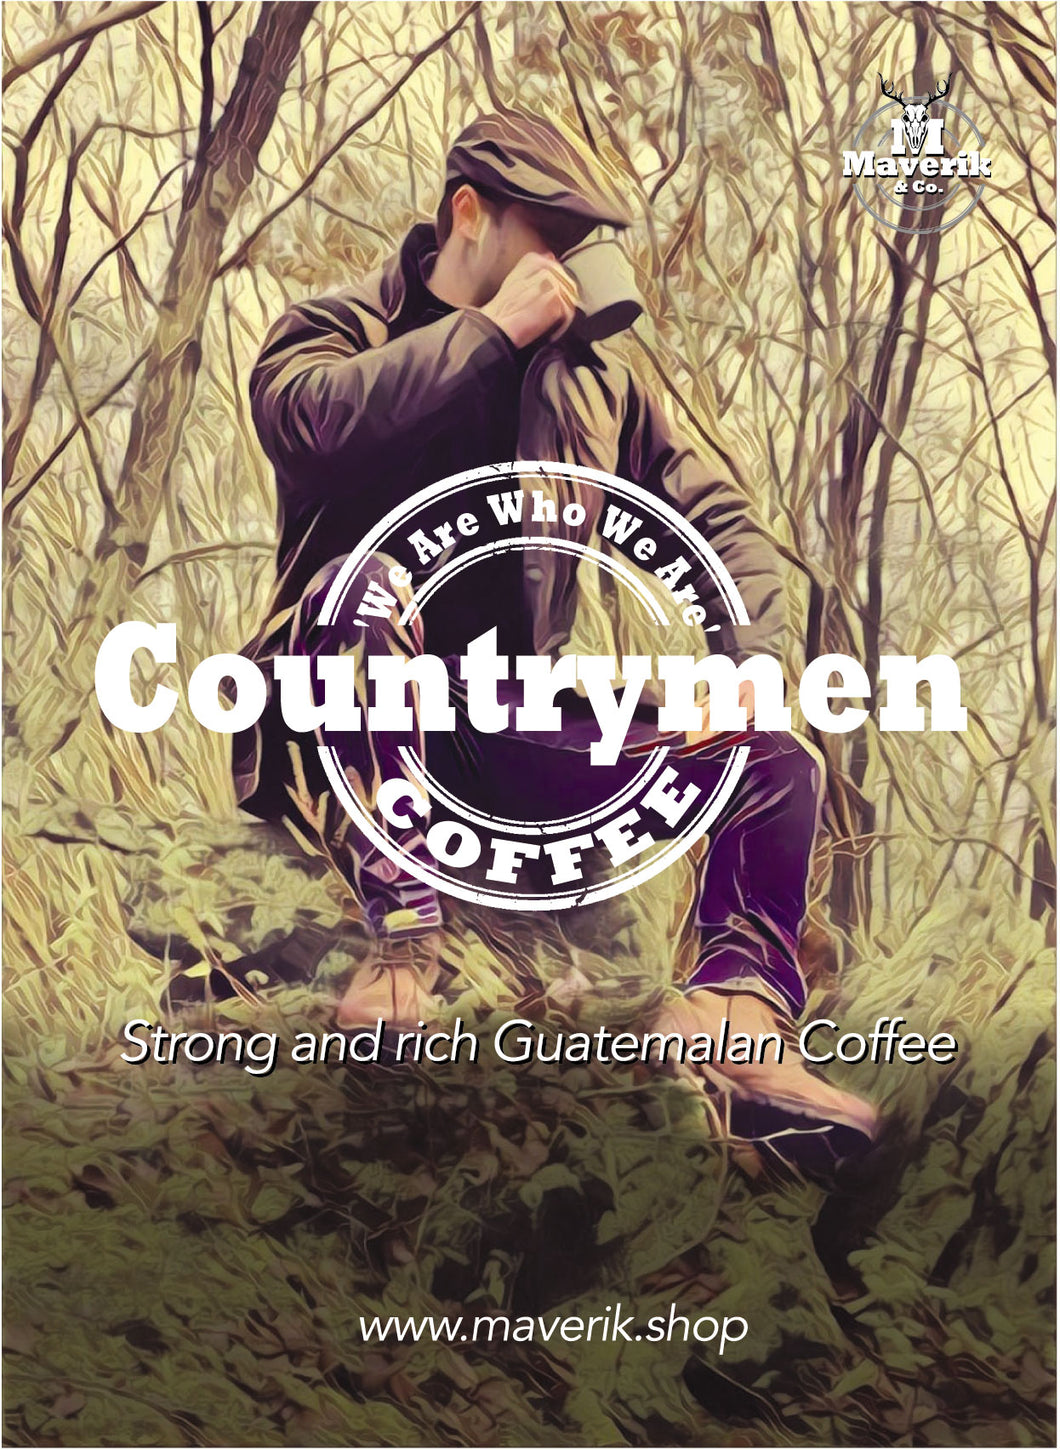 Countrymen Coffee 'We Are Who We Are'